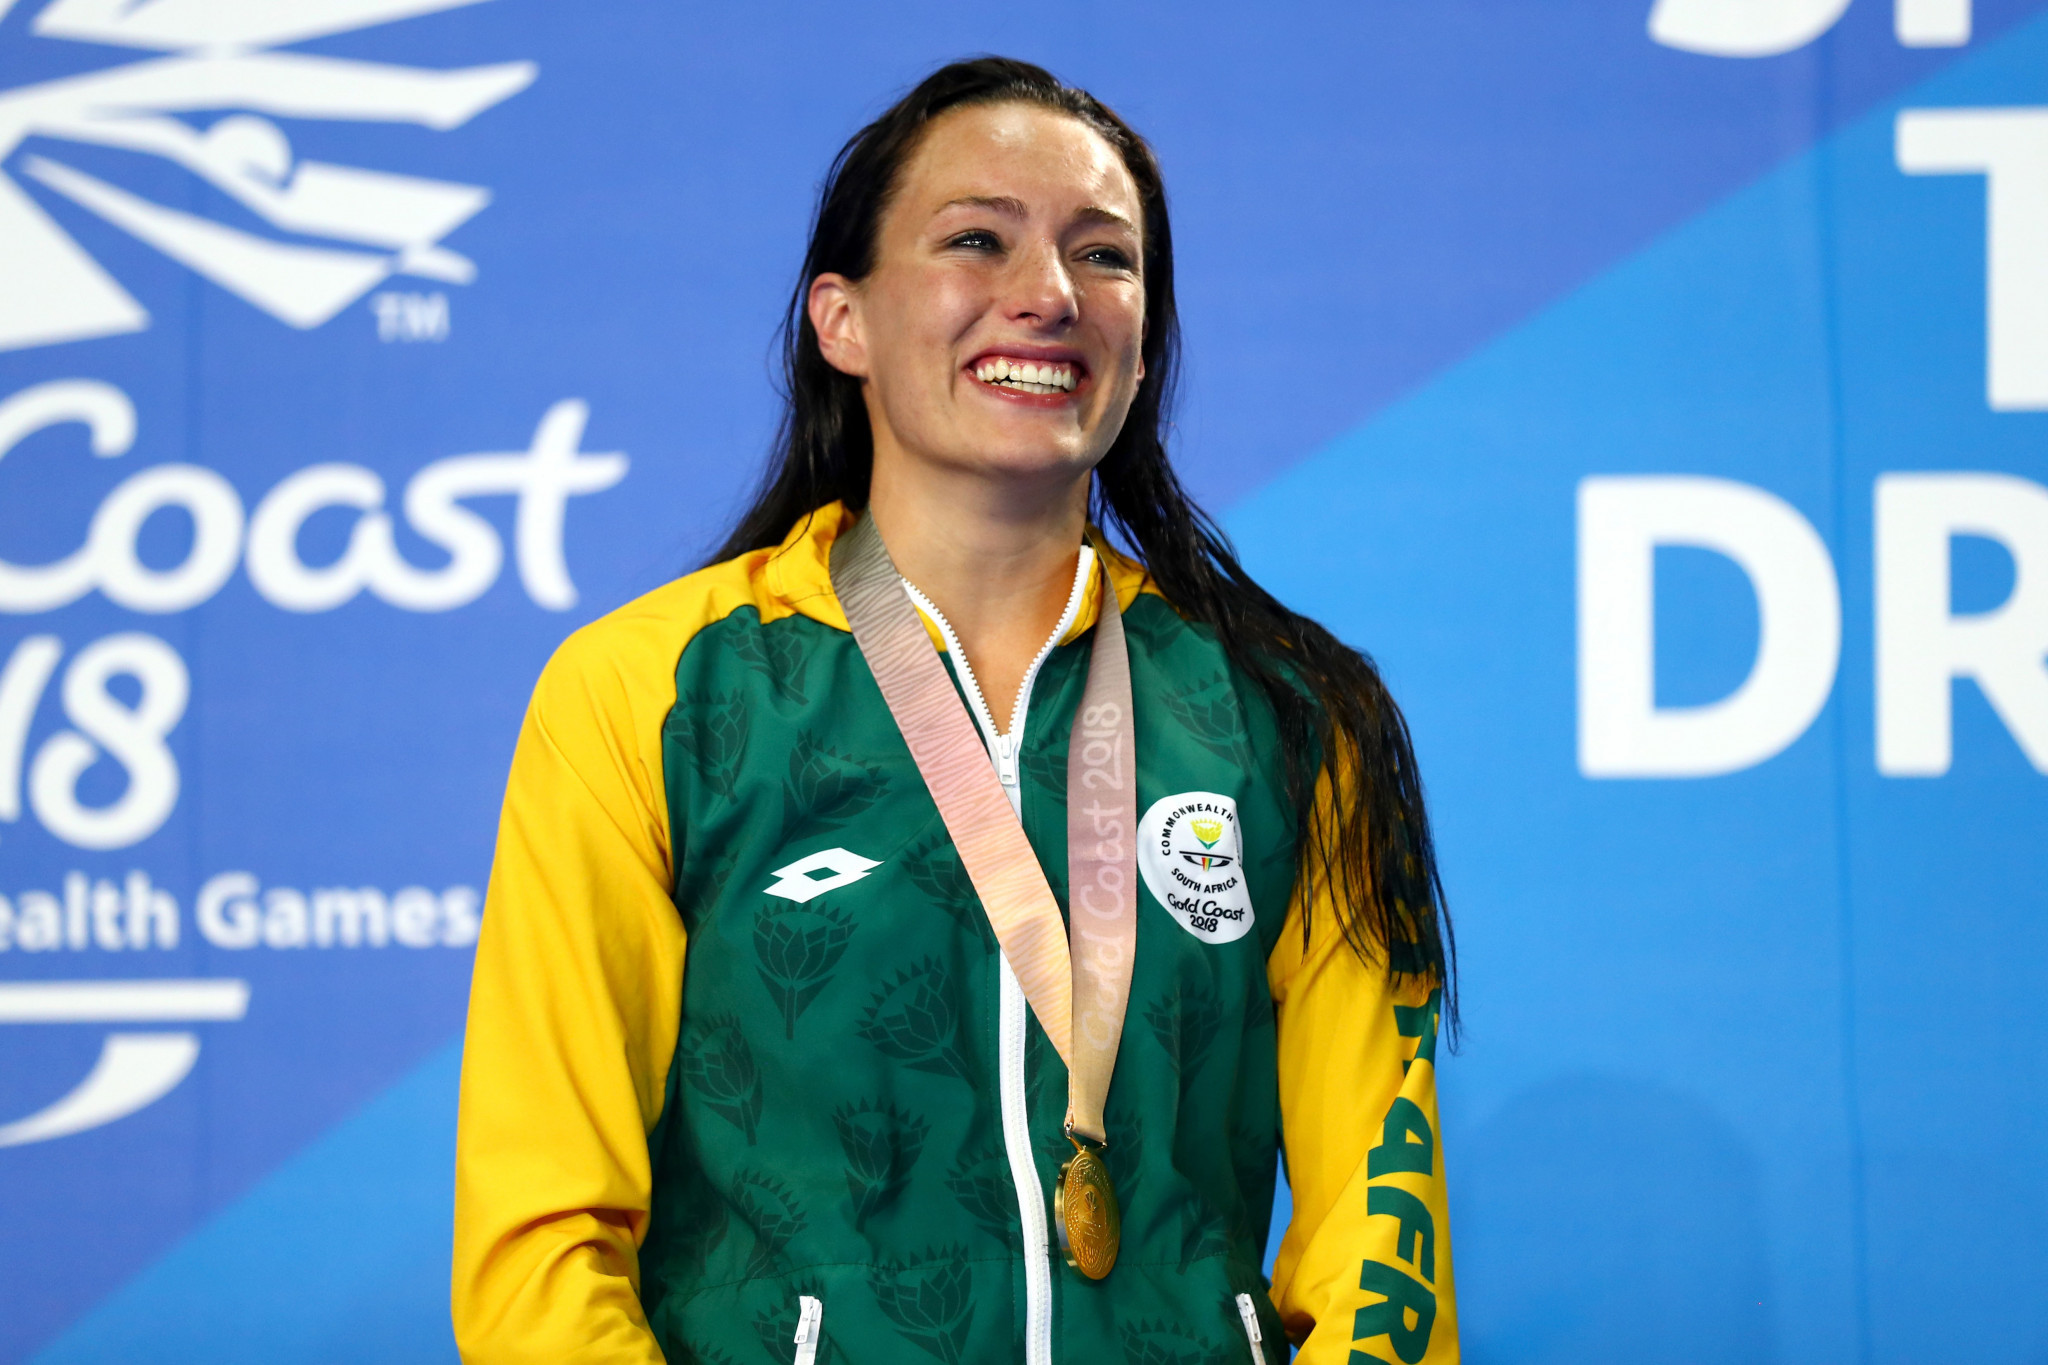 Tatjana Schoenmaker of South Africa won two gold medals at Gold Coast 2018, the last Commonwealth Games ©Getty Images